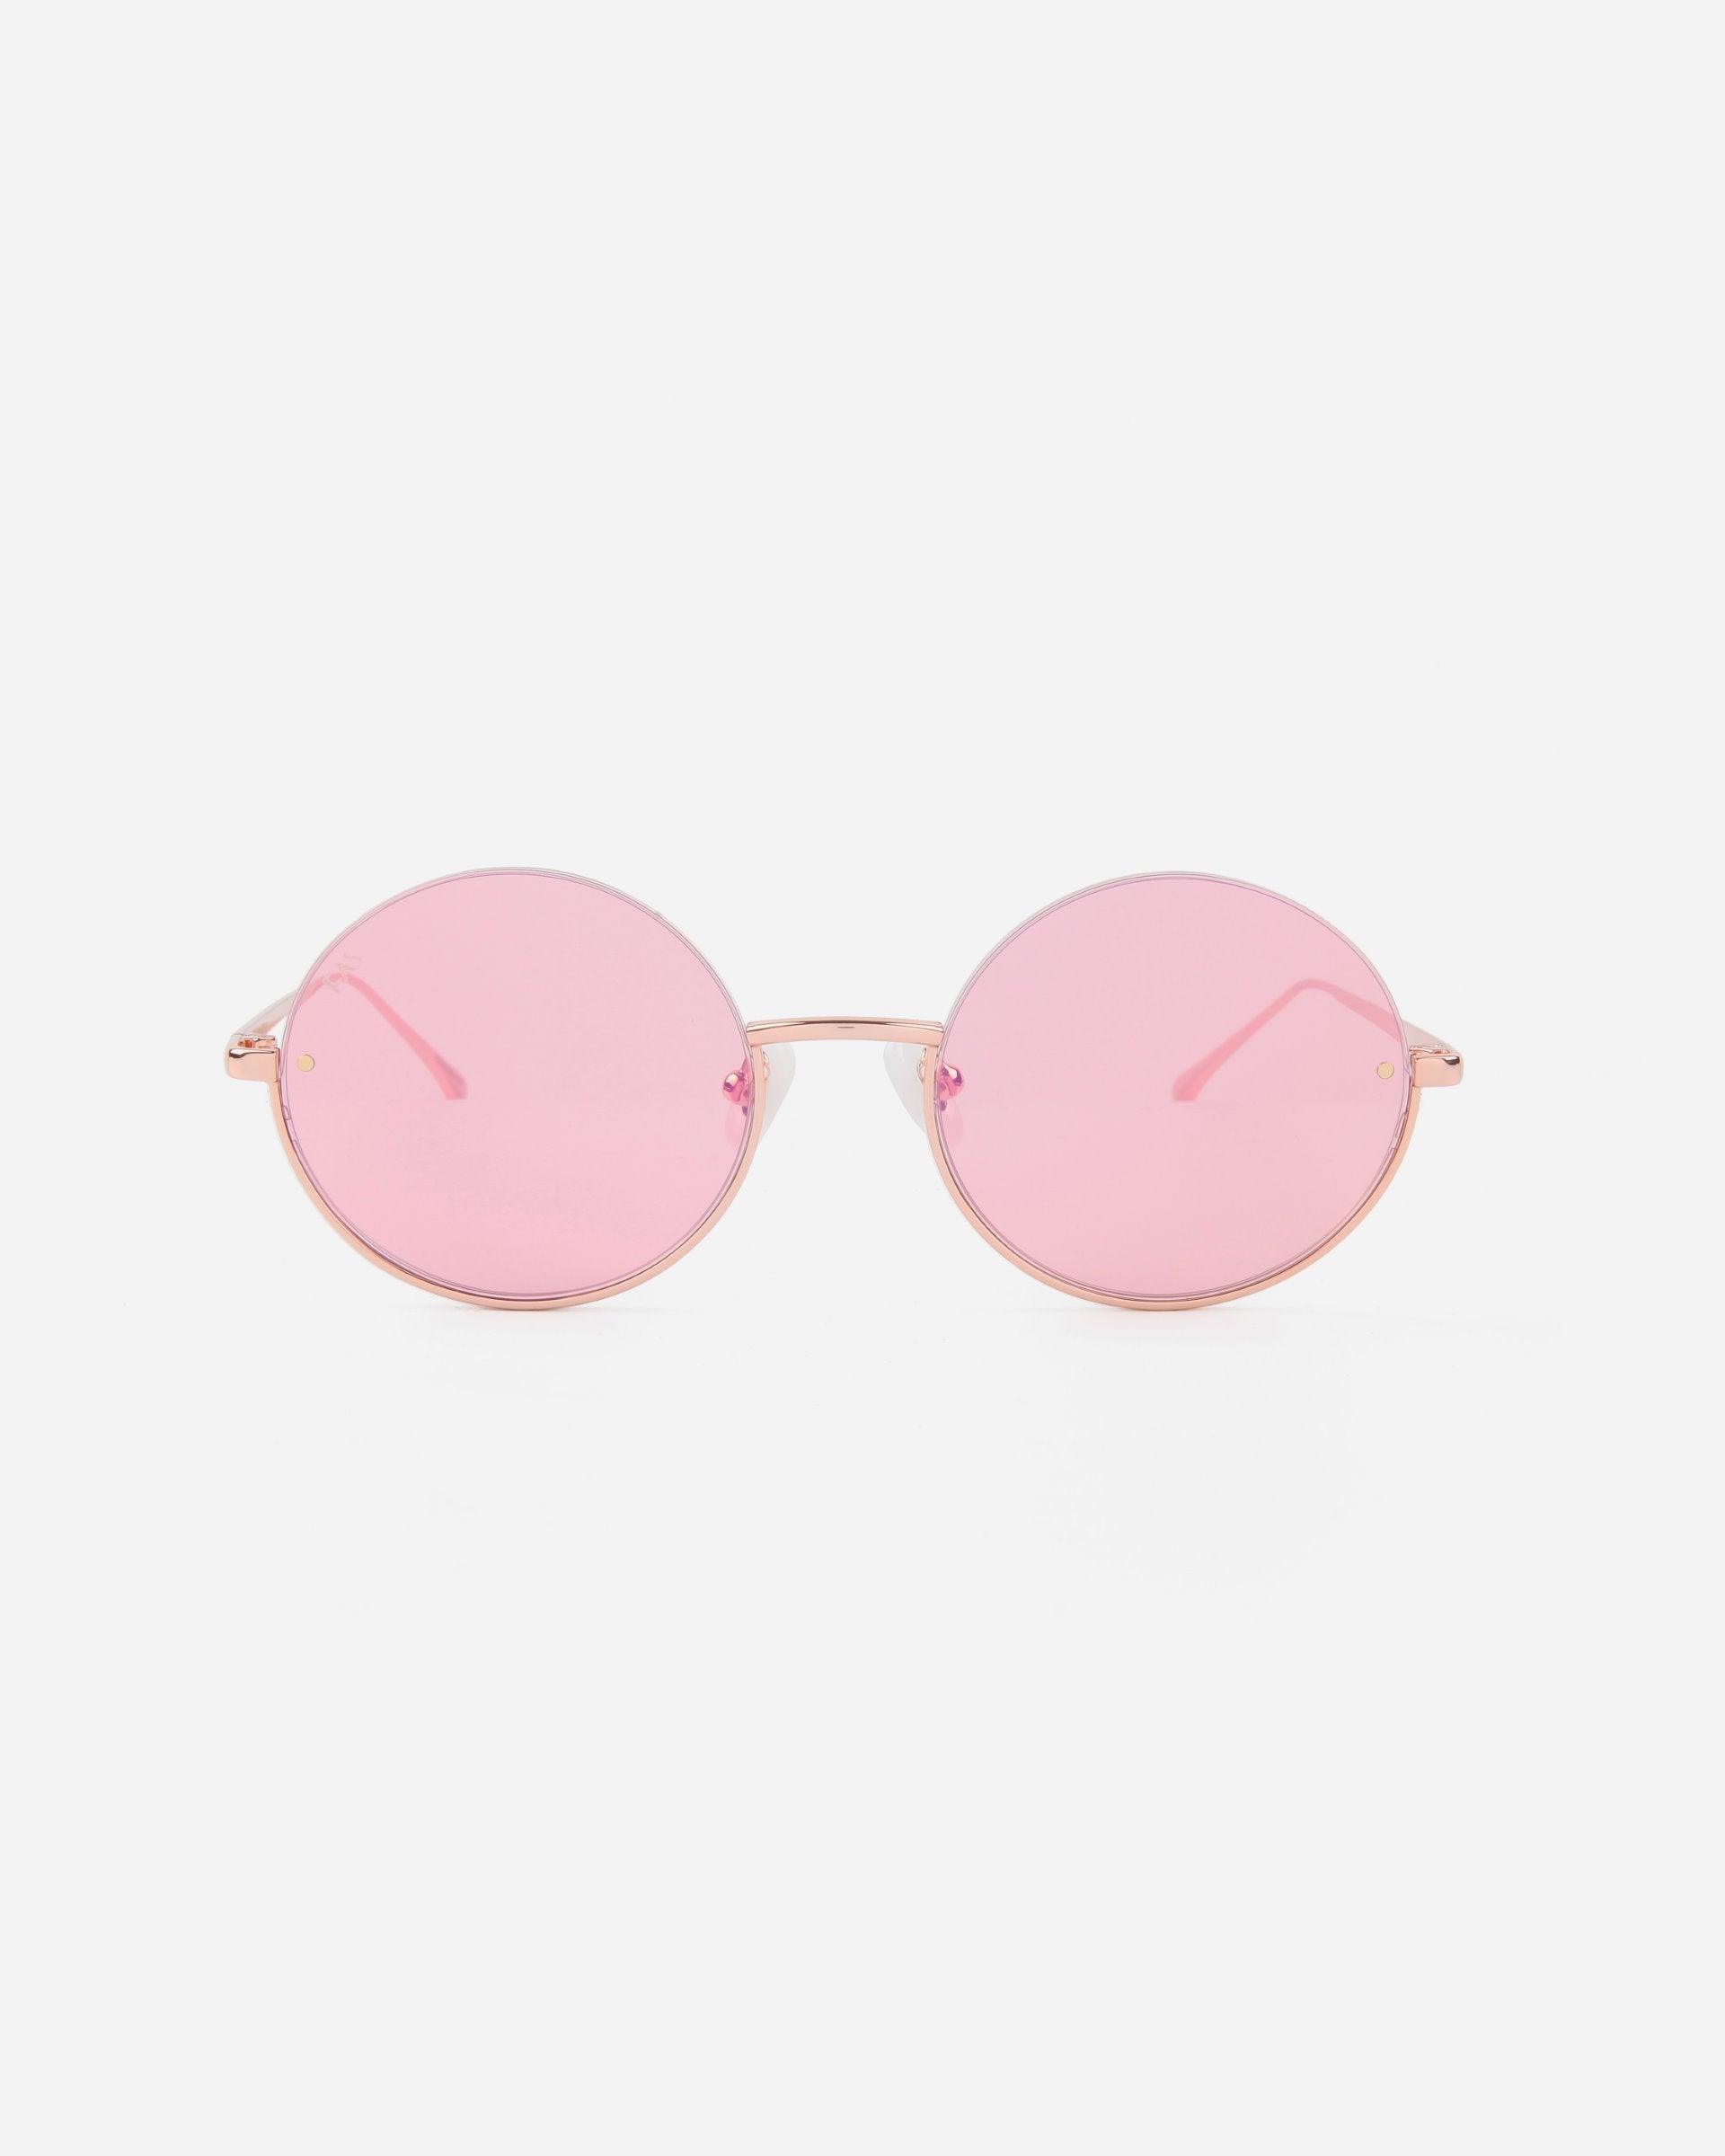 A pair of Skyline sunglasses by For Art&#39;s Sake® with pink-tinted, UVA &amp; UVB-protected Nylon lenses and thin gold stainless steel frames. The design is minimalist, with straight temples and no visible branding. The background is plain white, emphasizing the eyewear&#39;s trendy and stylish appearance.